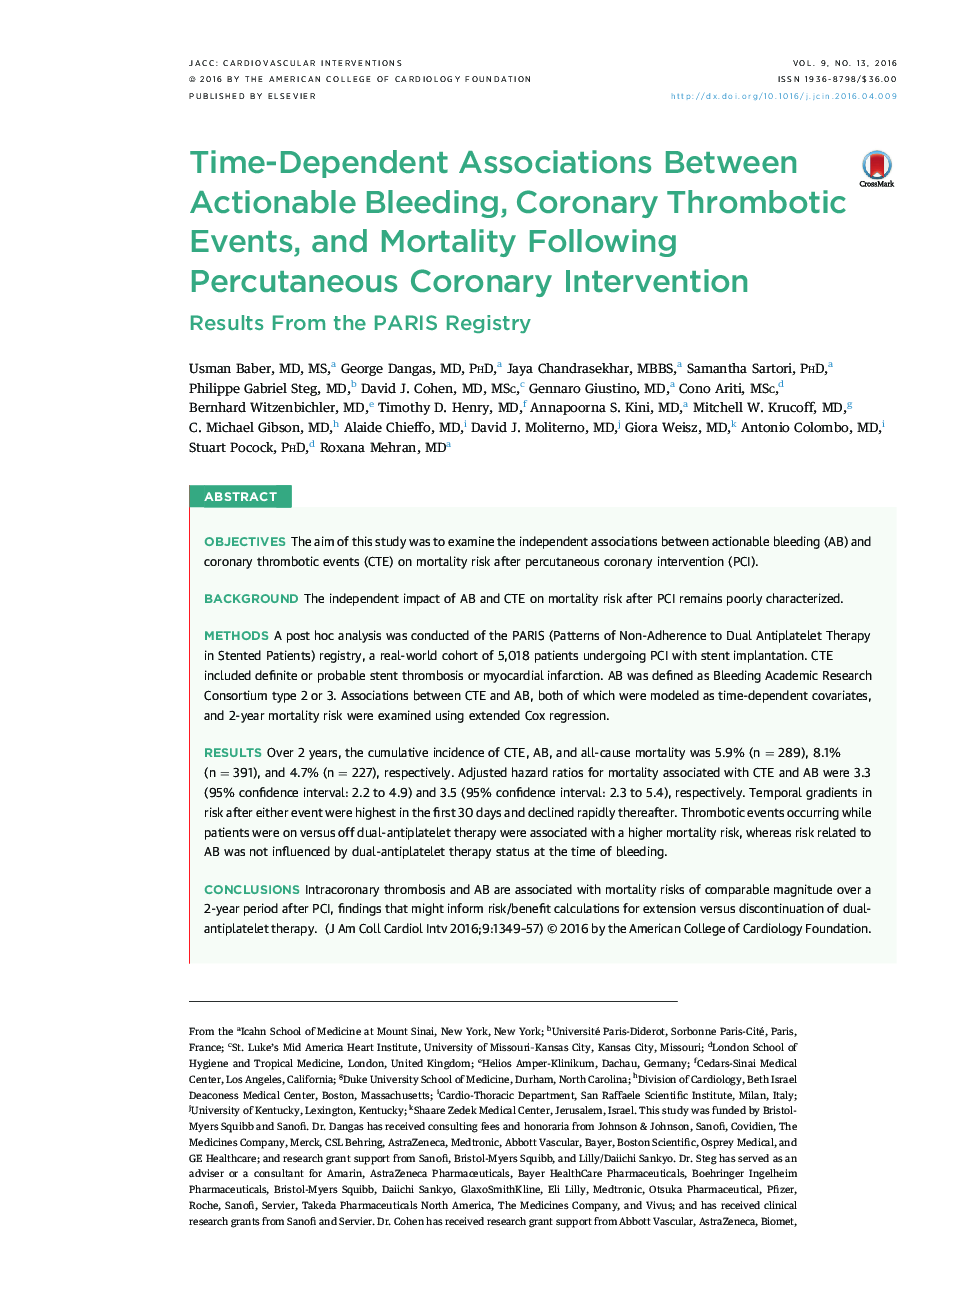 Time-Dependent Associations Between Actionable Bleeding, Coronary Thrombotic Events, and Mortality Following Percutaneous Coronary Intervention : Results From the PARIS Registry